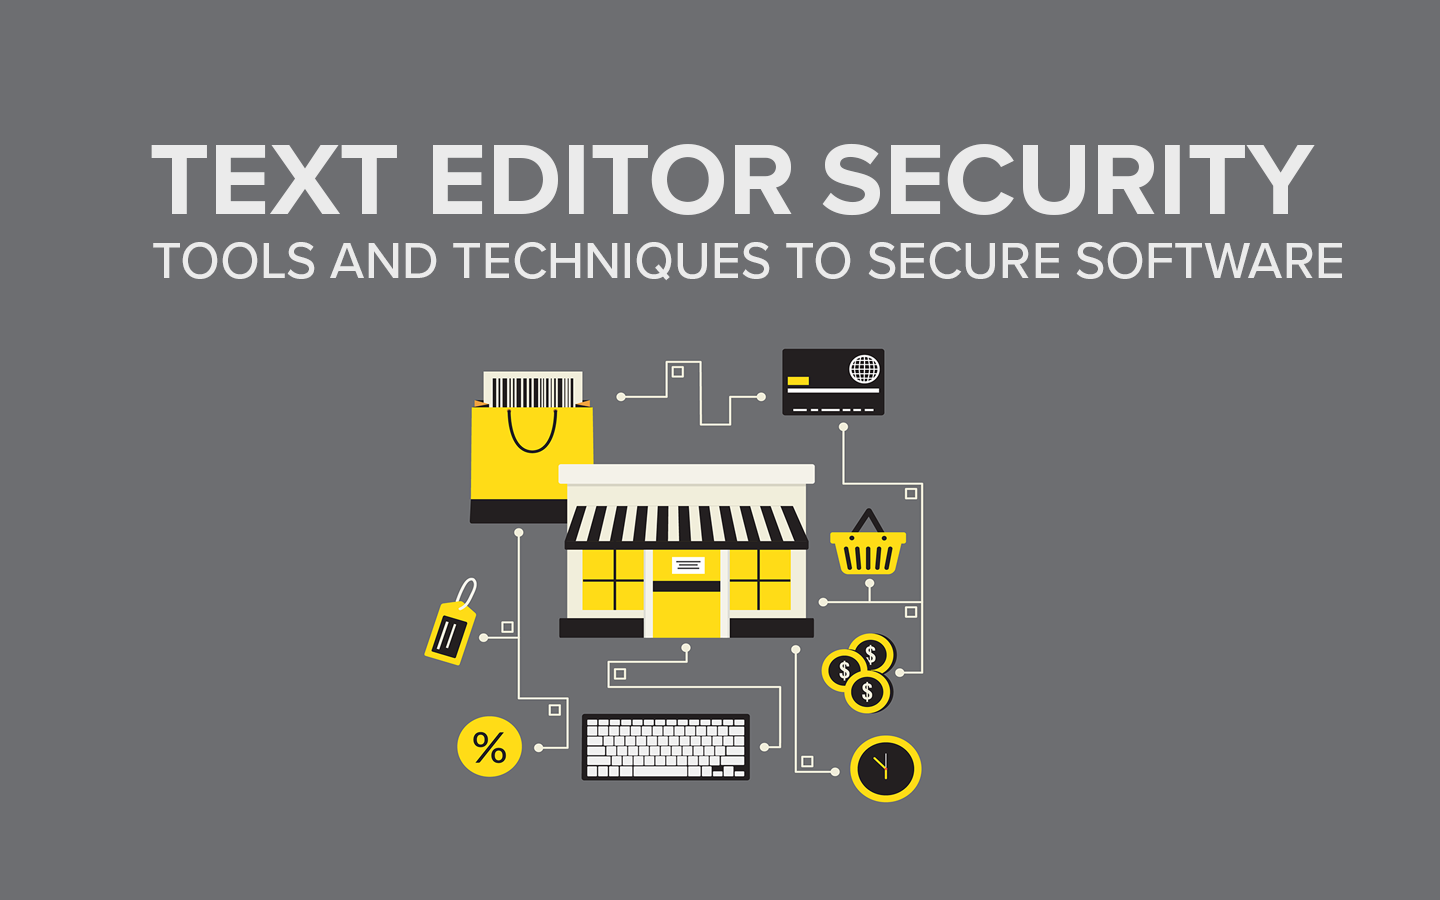 Keeping your files safe: Why UltraEdit, a text editor, invests heavily in security